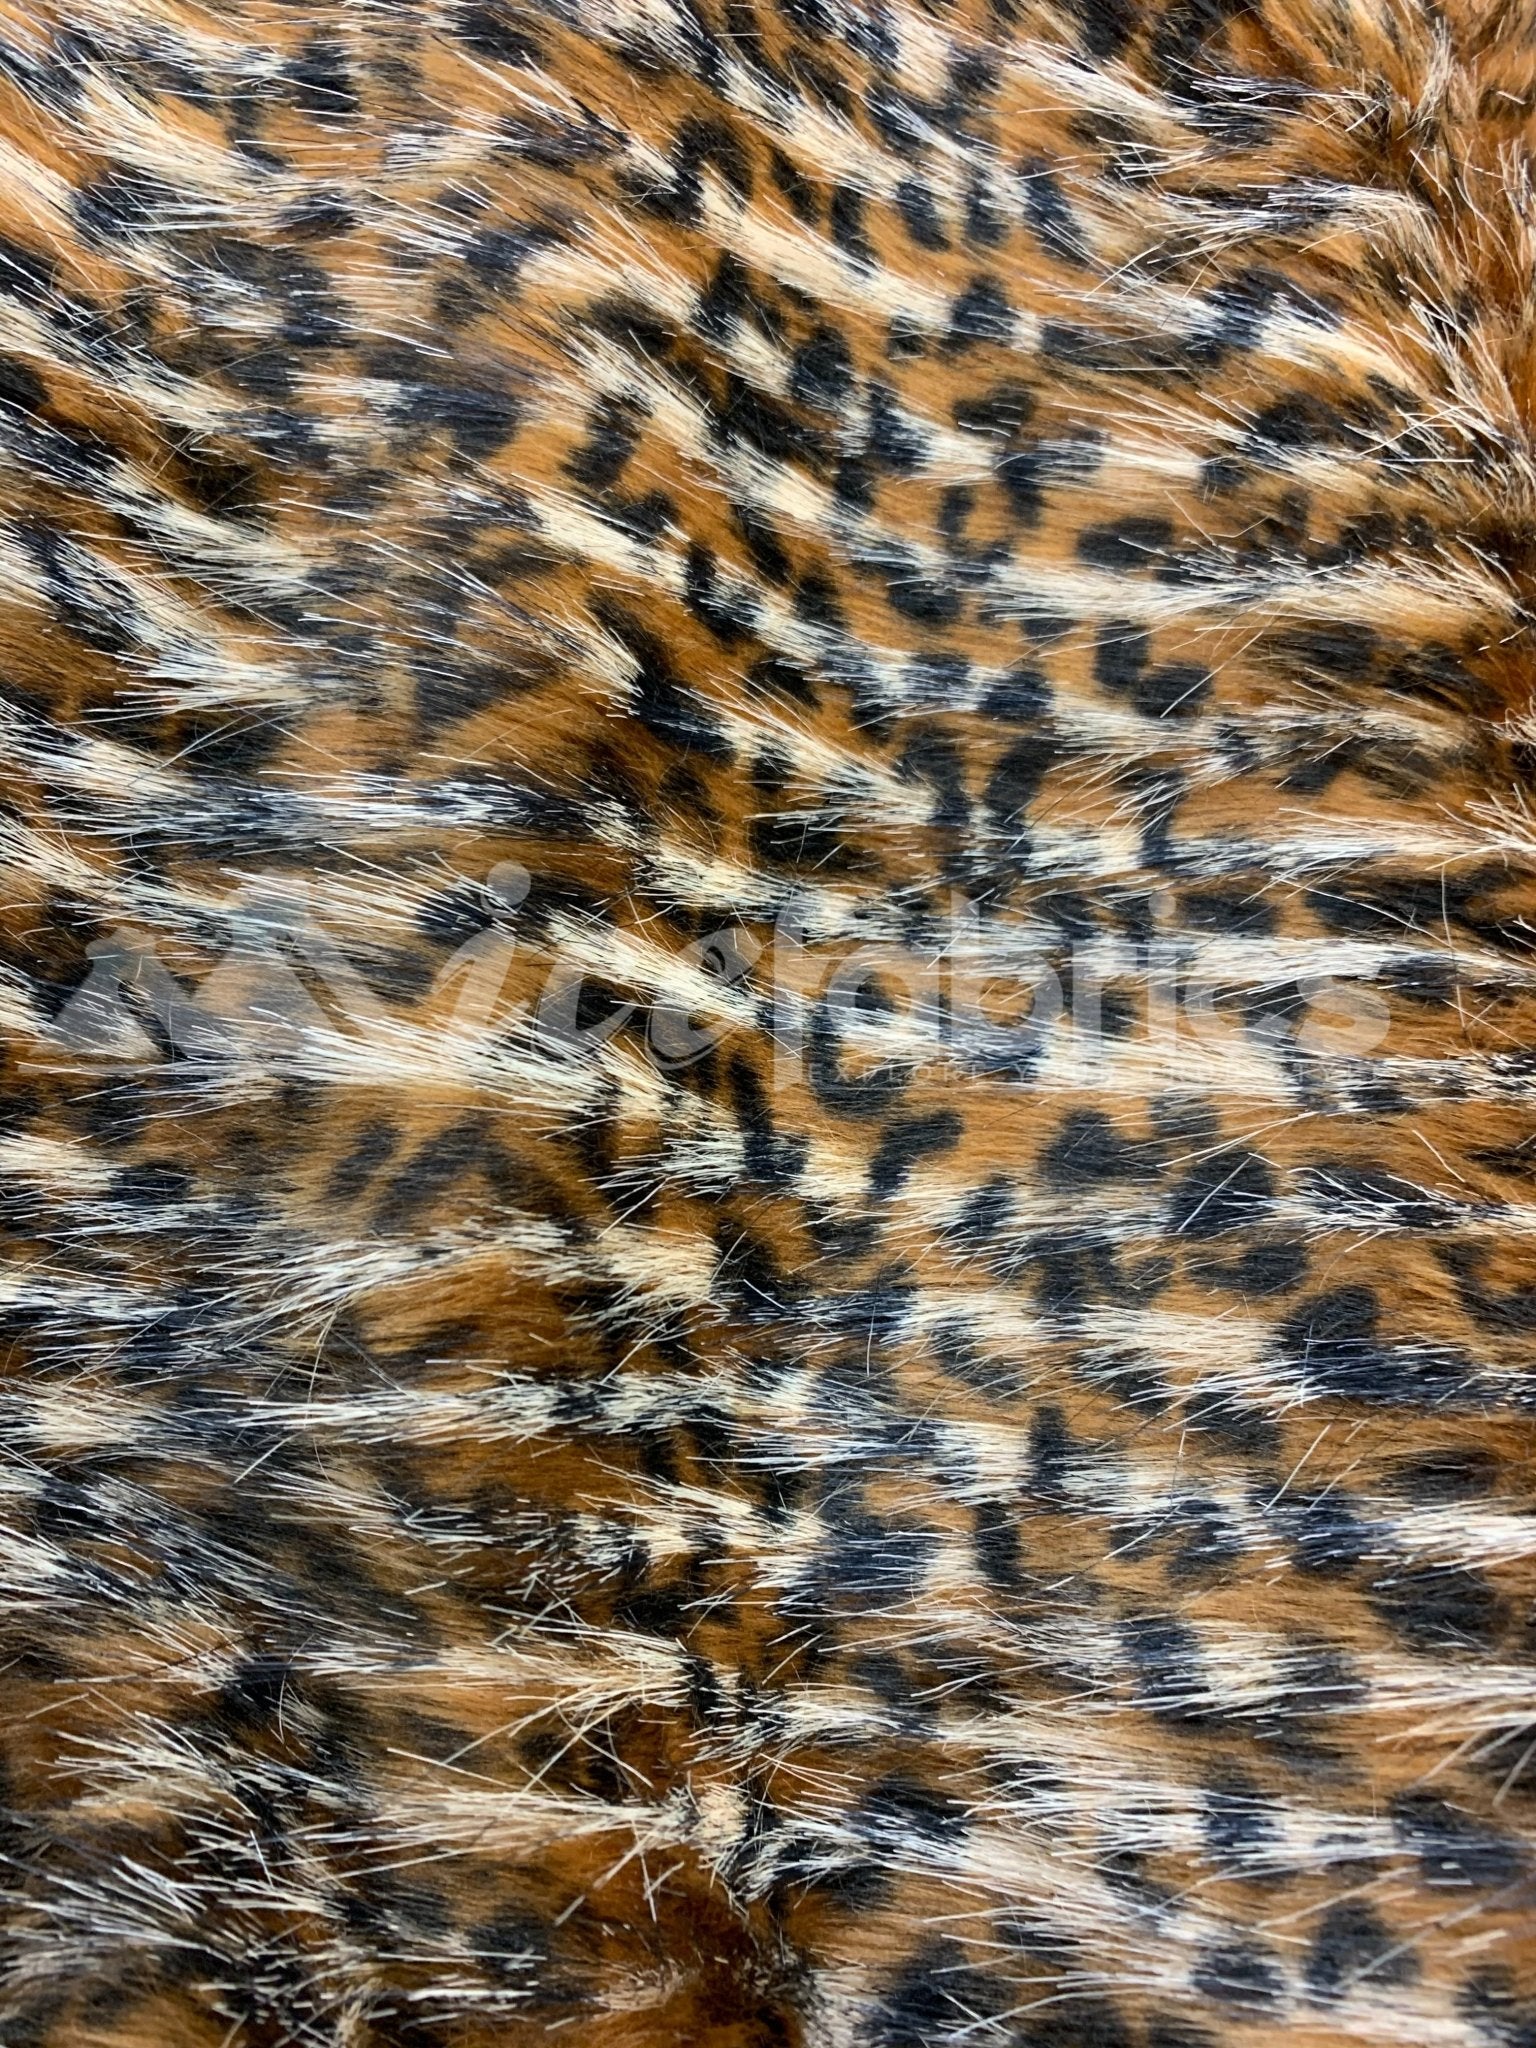 Long Pile Gold Leopard Faux Fur Fabric Material By The YardICEFABRICICE FABRICSBy The Yard (60 inches Wide)Long Pile Gold Leopard Faux Fur Fabric Material By The Yard ICEFABRIC